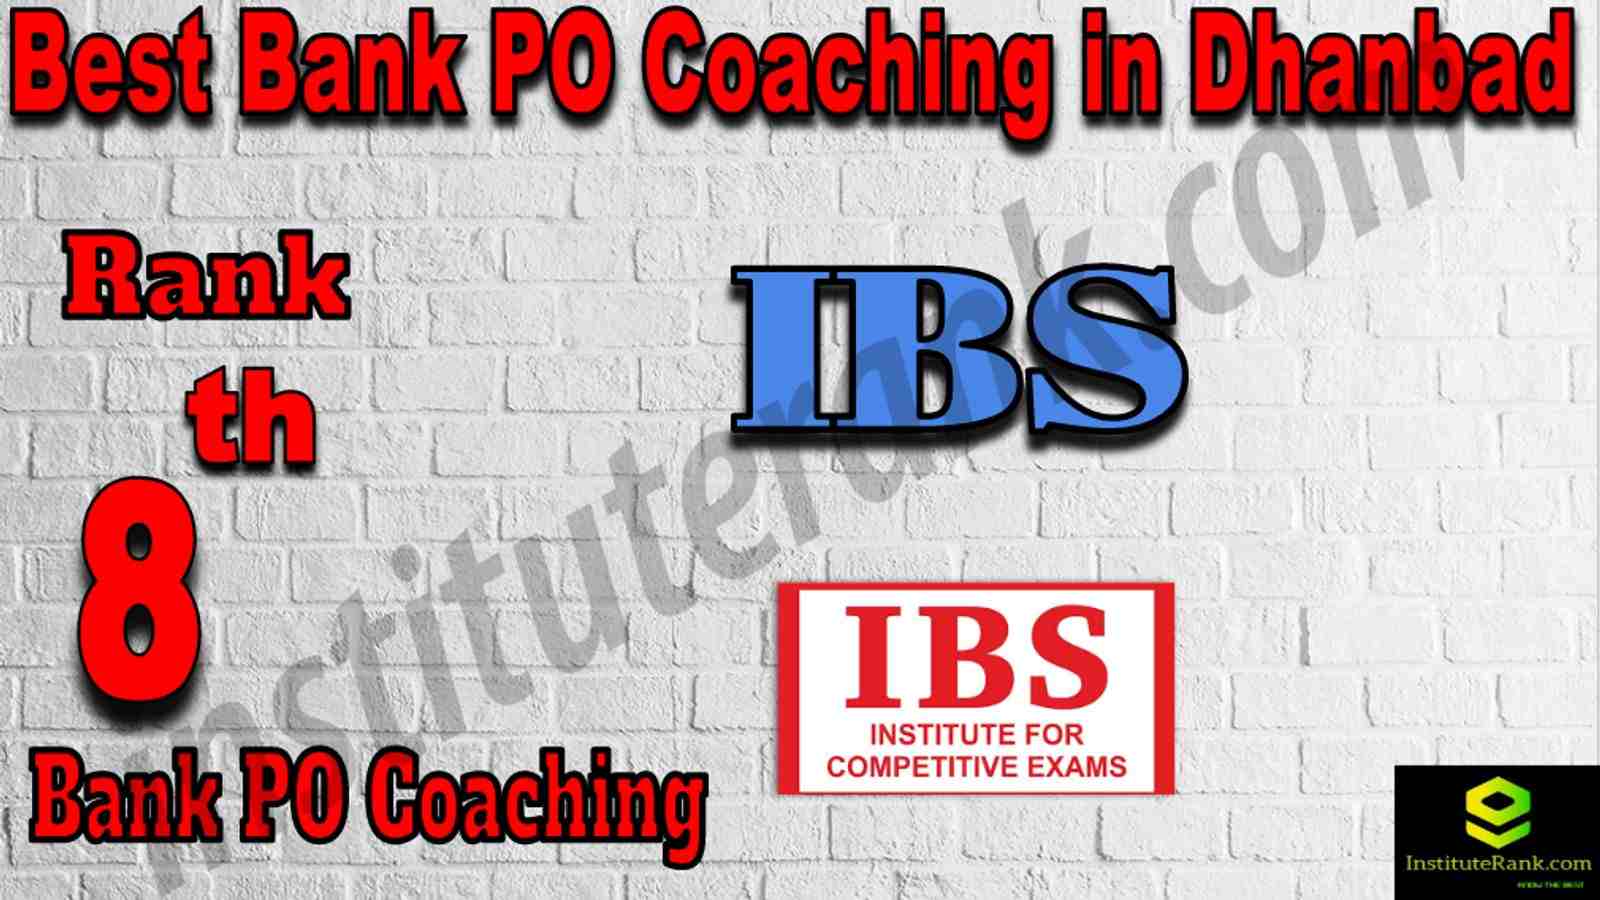 8th Best Bank PO Coaching in Dhanbad